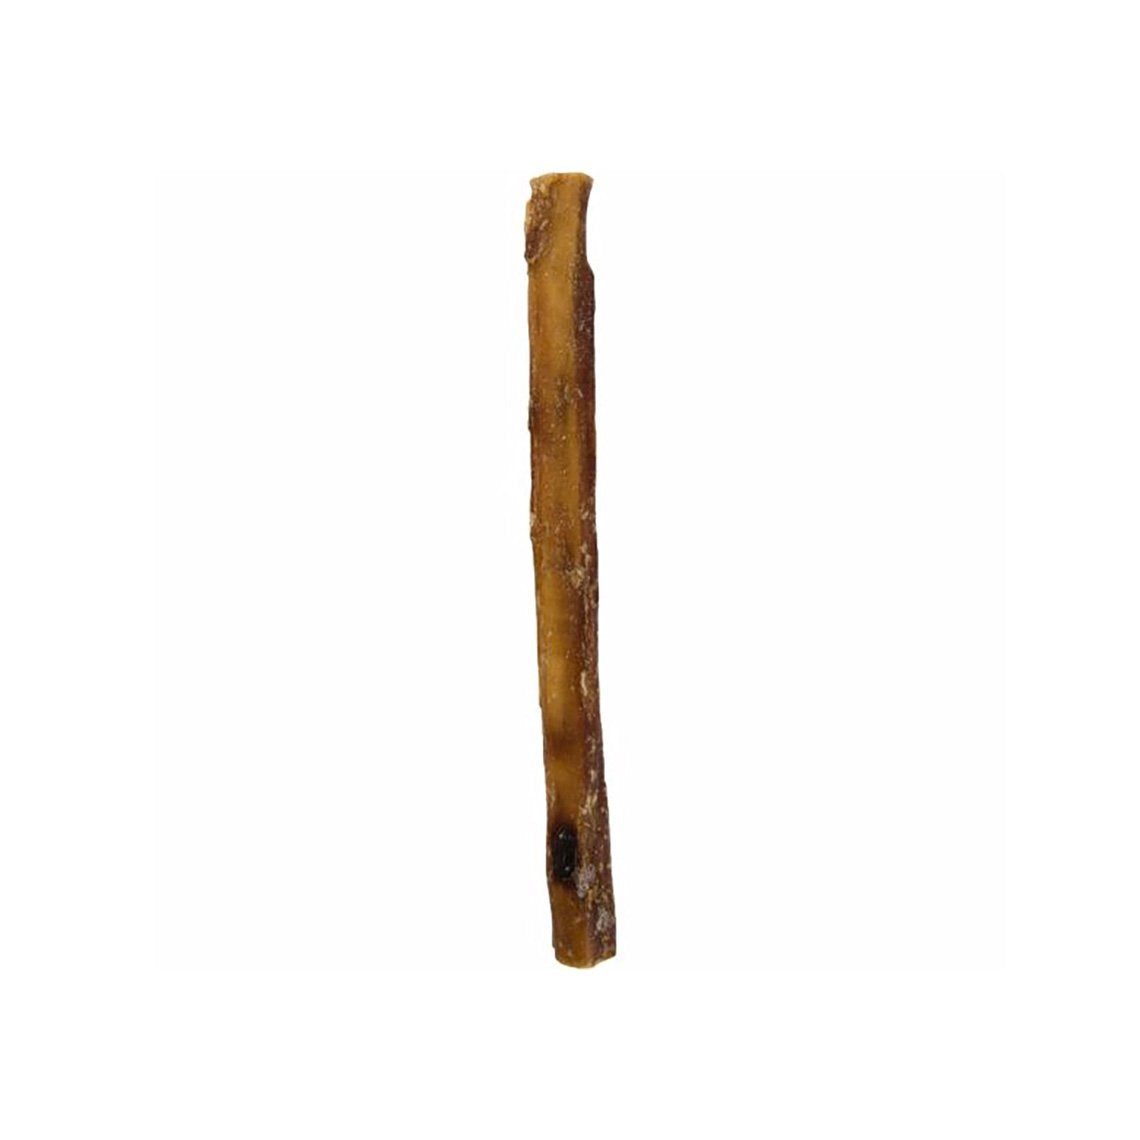 Only Natural Pet Free Range Extra Thick Bully Sticks for Dogs -  MPN_4084549320768